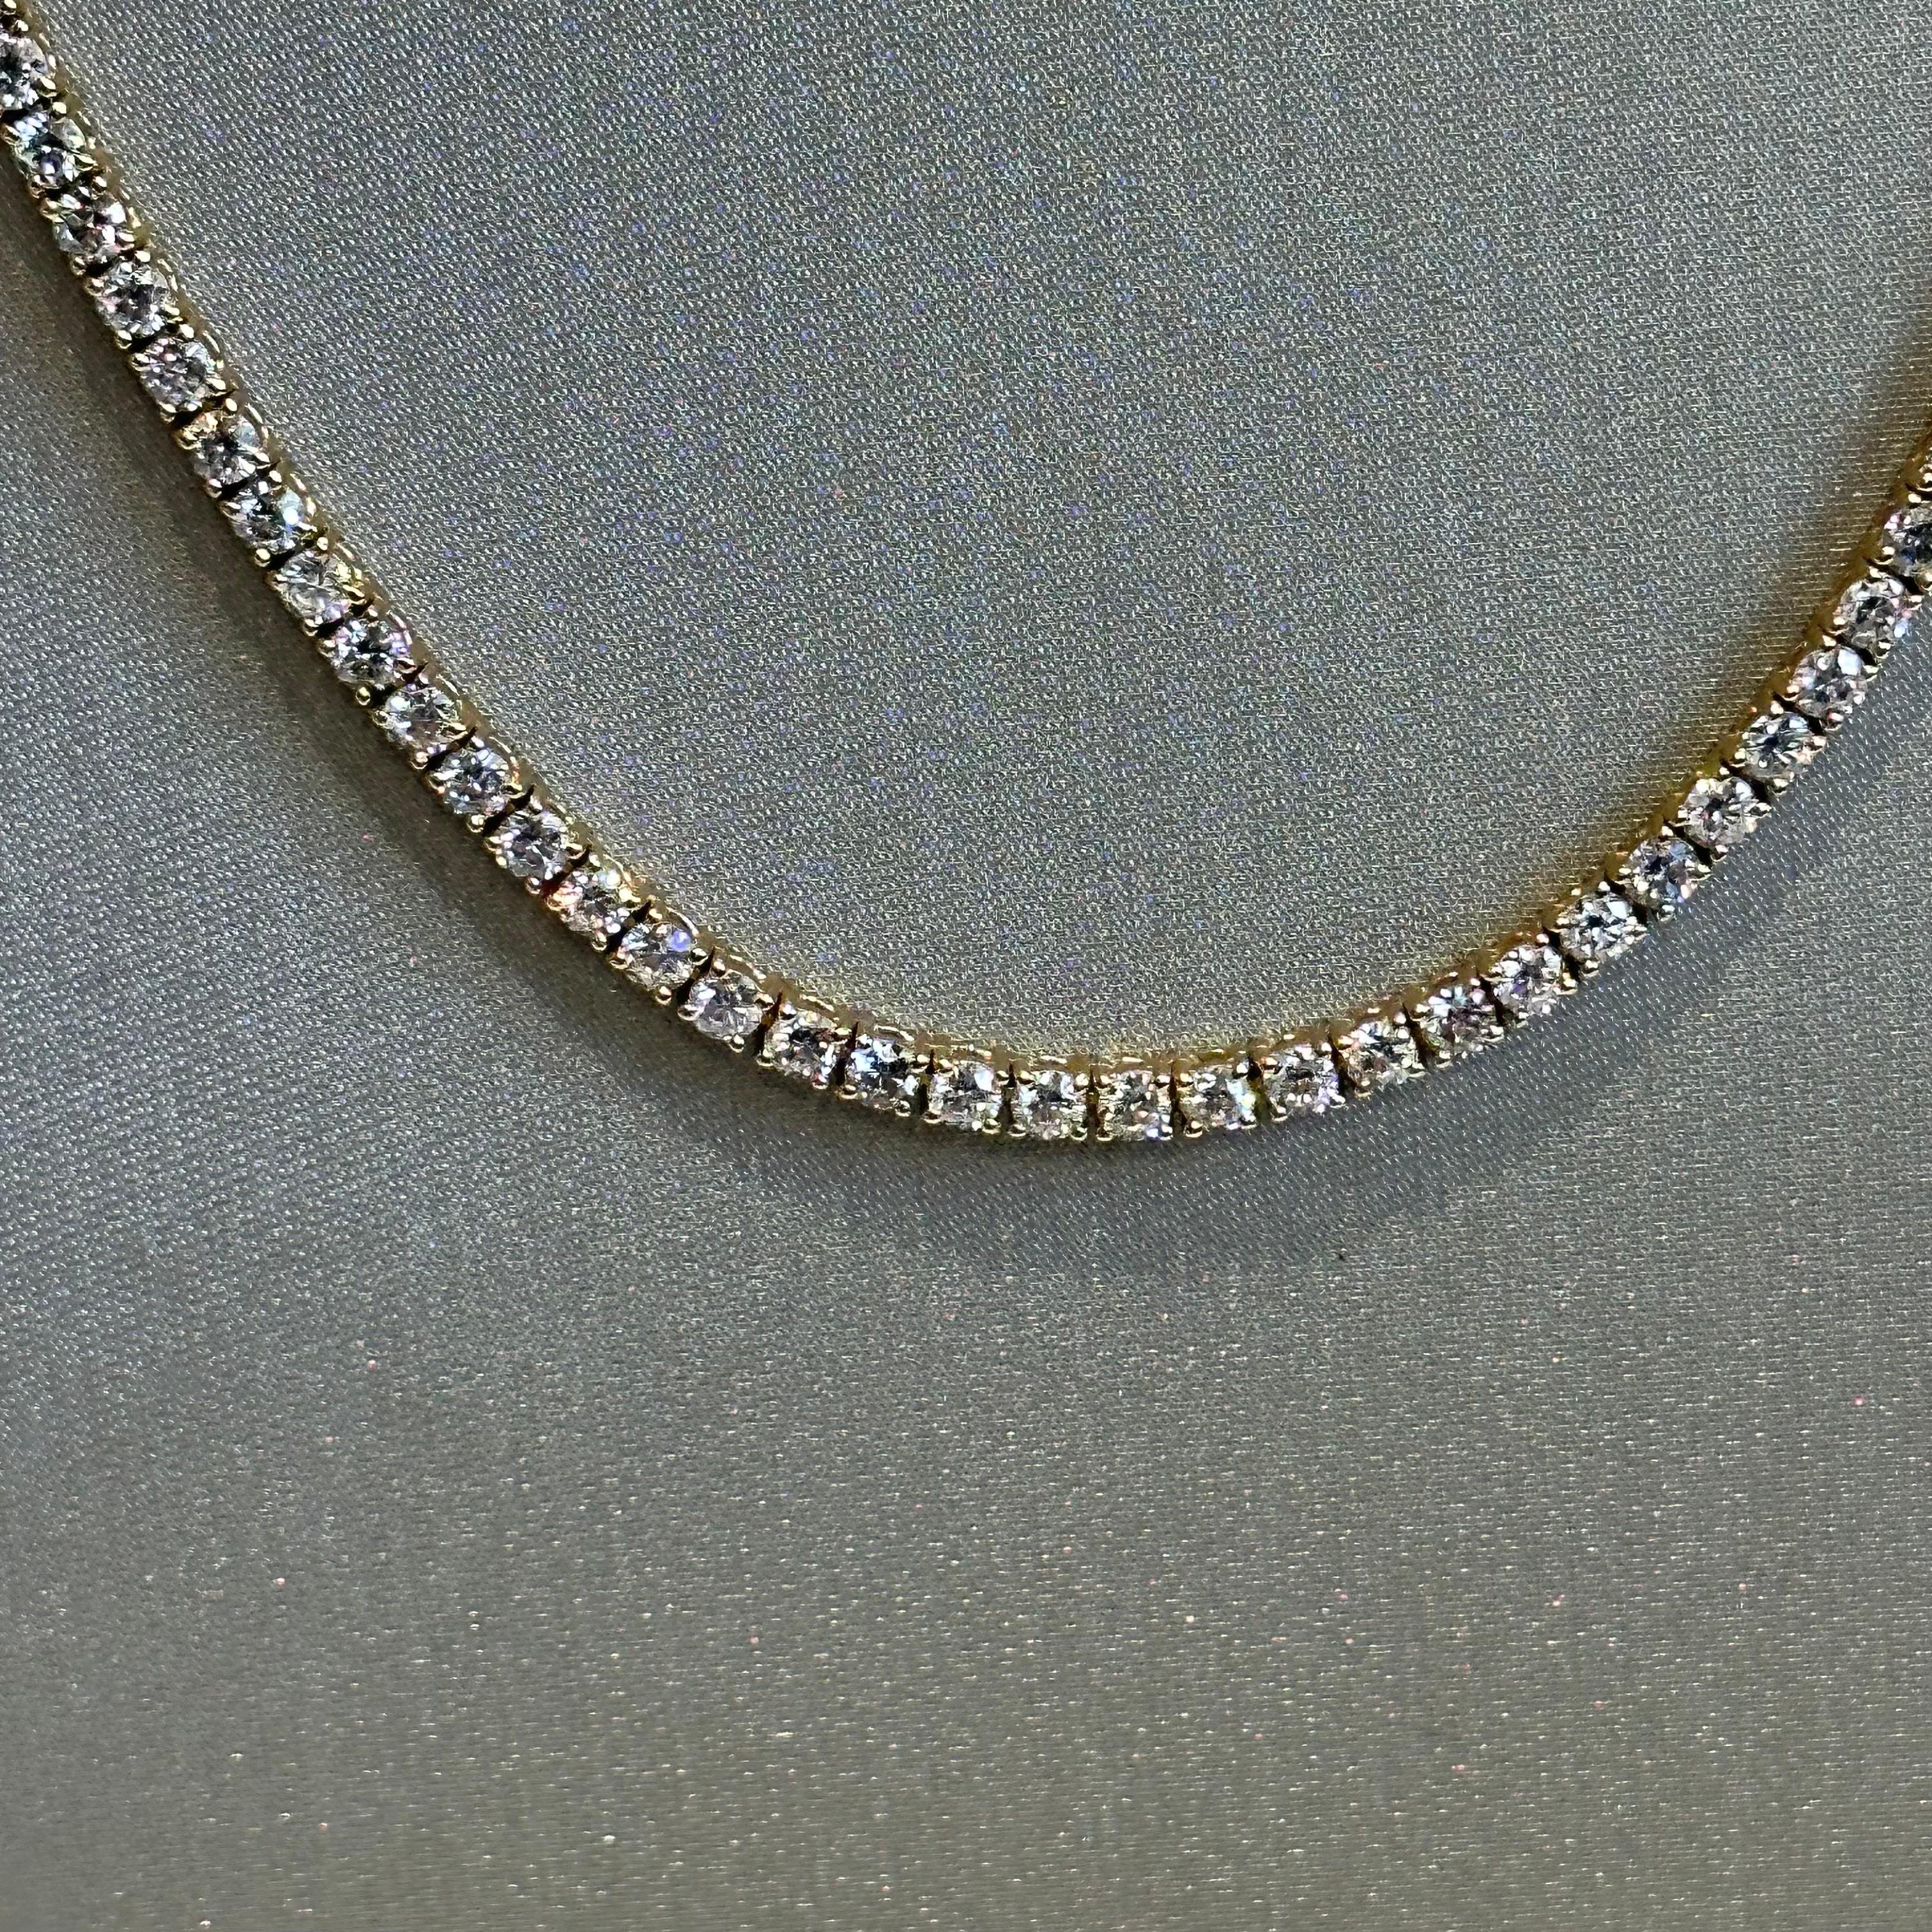 Gorgeous 15 carats Diamond tennis necklace crafted in 14k rose gold with 140 diamonds. Elegant and chic this Necklace is a must have to your collection. 
